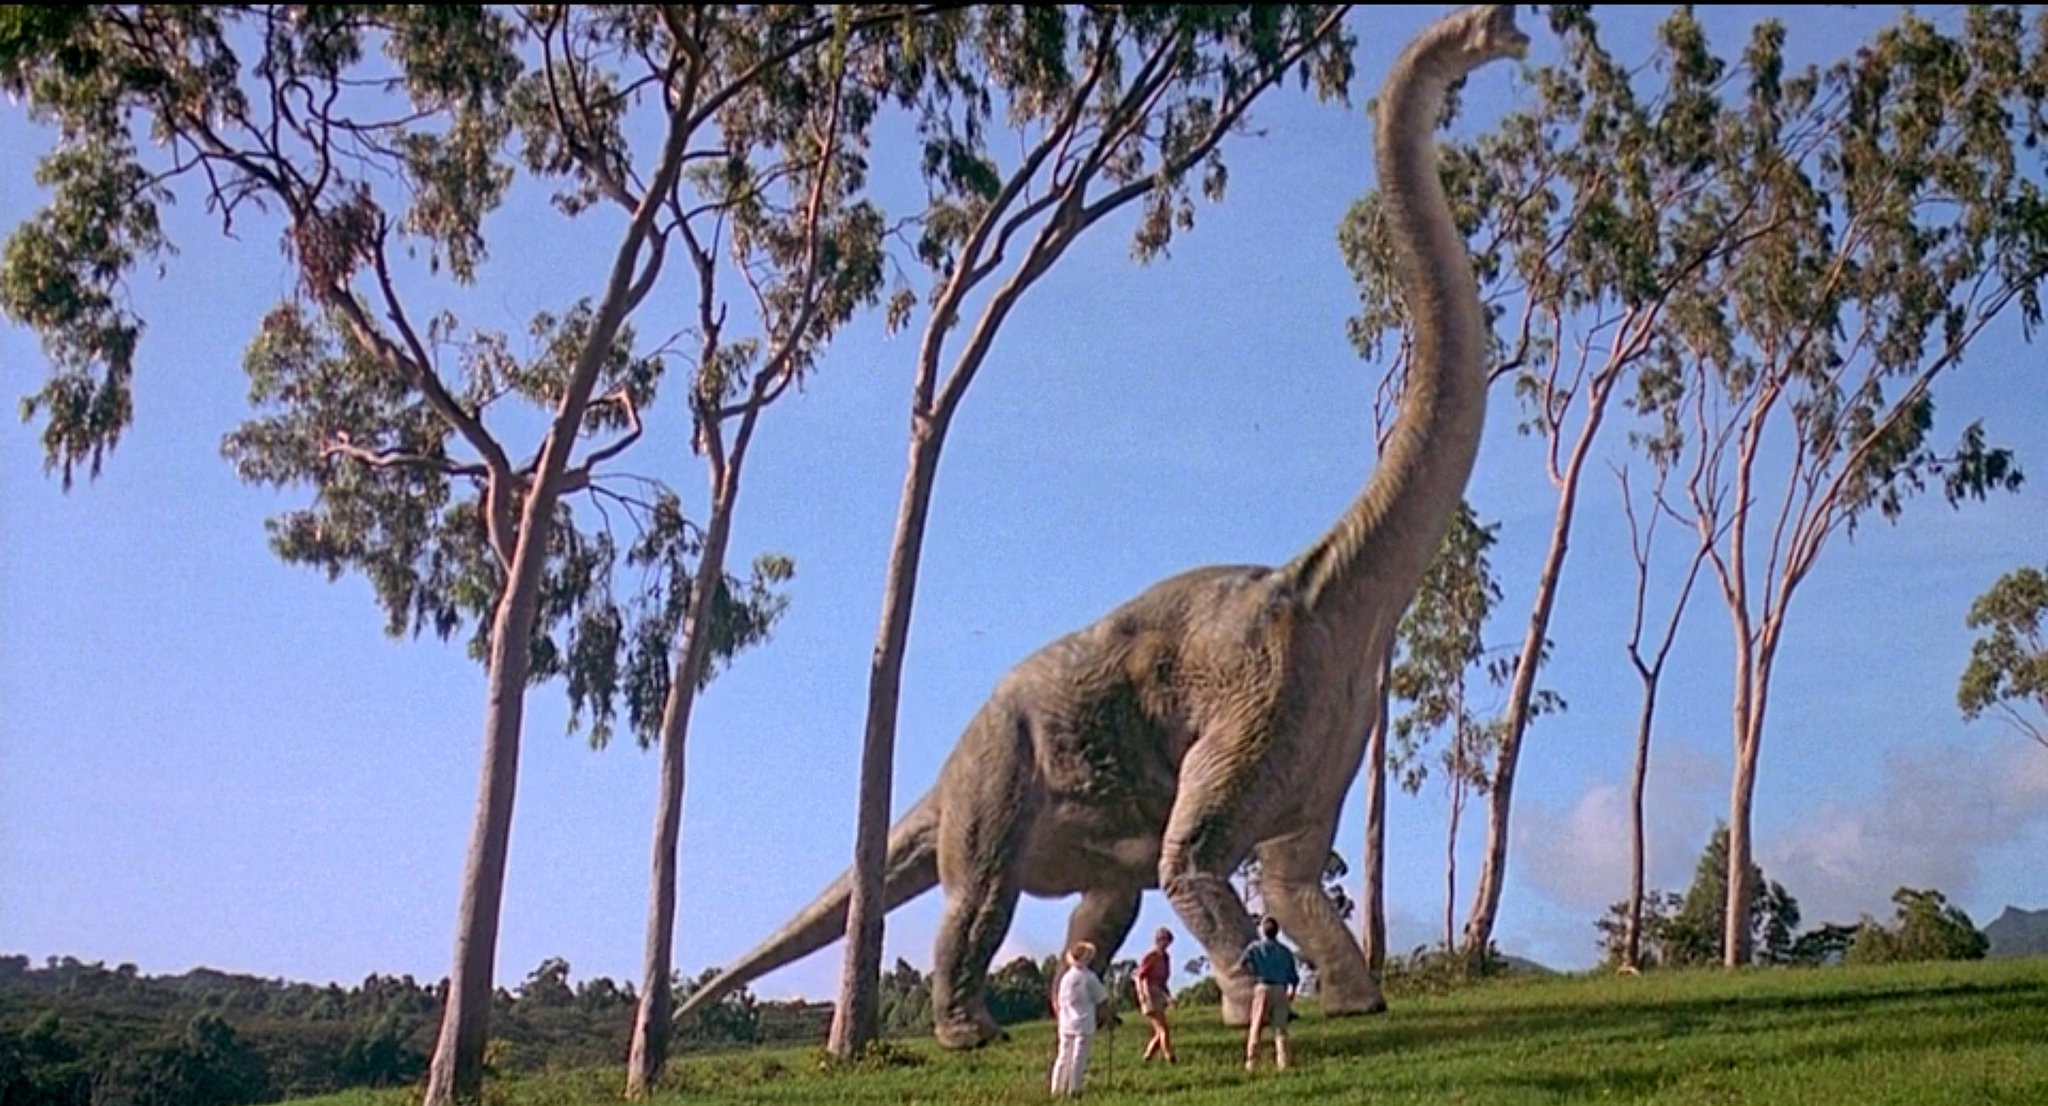 Welcome to Jurassic Park. (Photo: Universal Pictures)